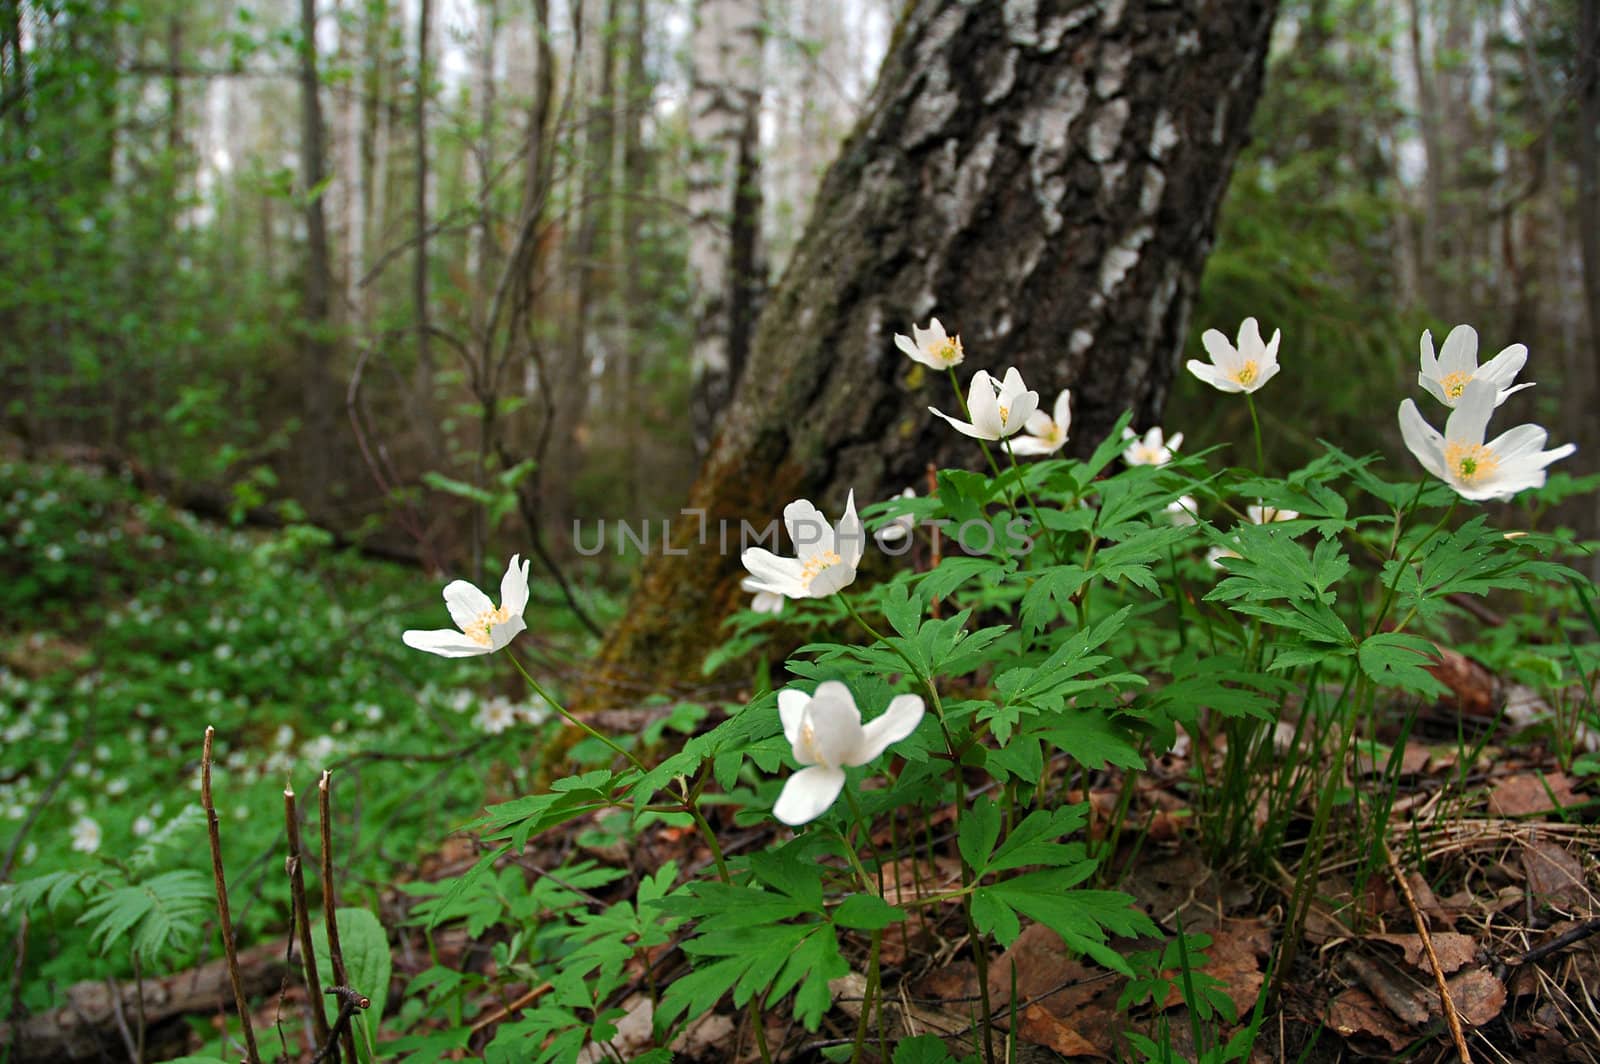 Small white flowers stand on the forest floor.